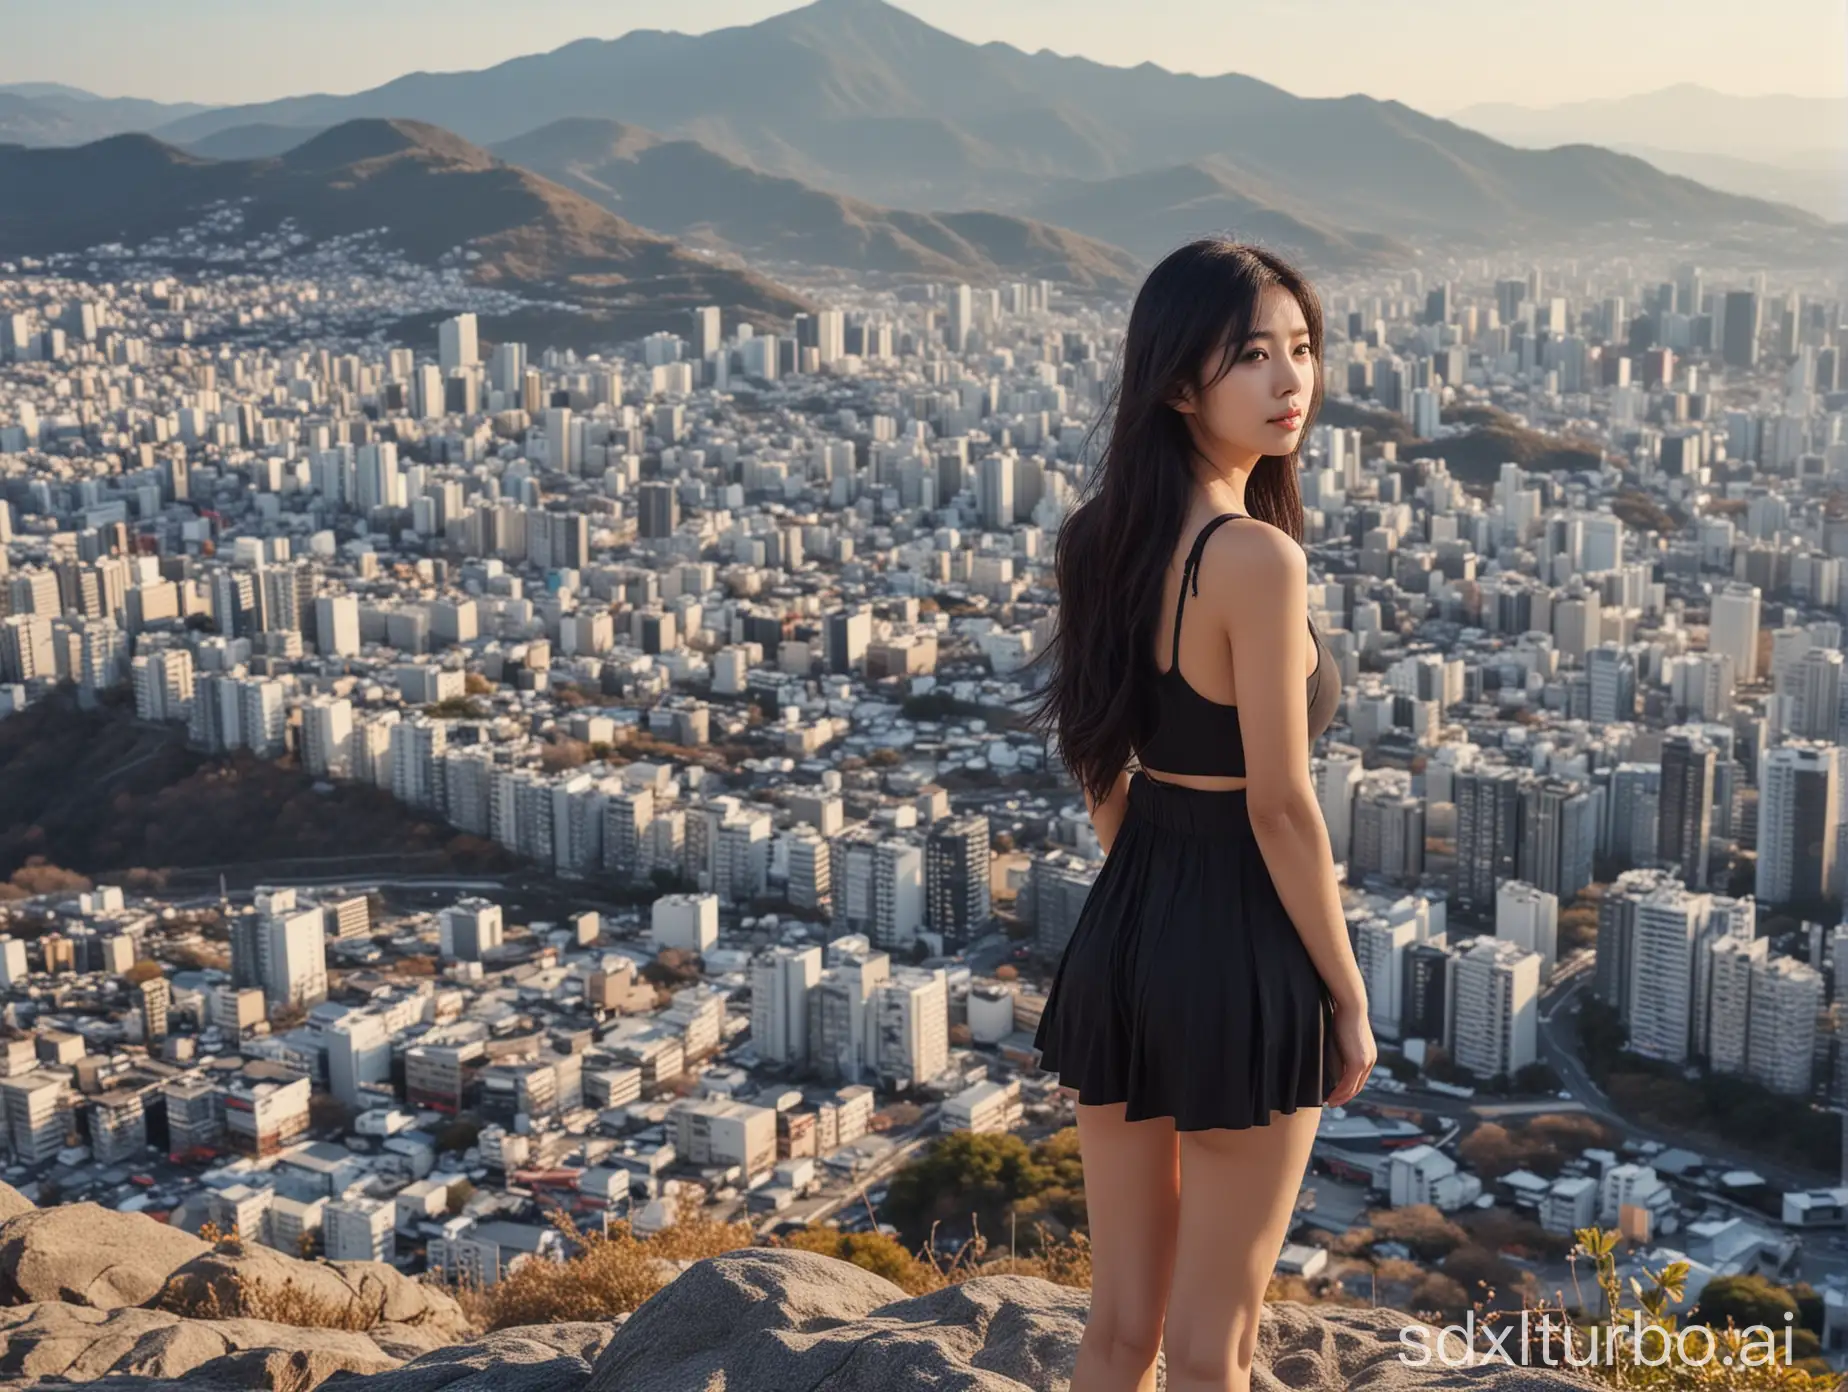 beautiful intellectual typical Japanese 33-year-old girl stands at a top of a mountain which is surrounded by a beautiful city, Instagram model, long black hair, warm, black eyes, height 6.5 feets, female, masterpiece, 4k, correct fingers or hands